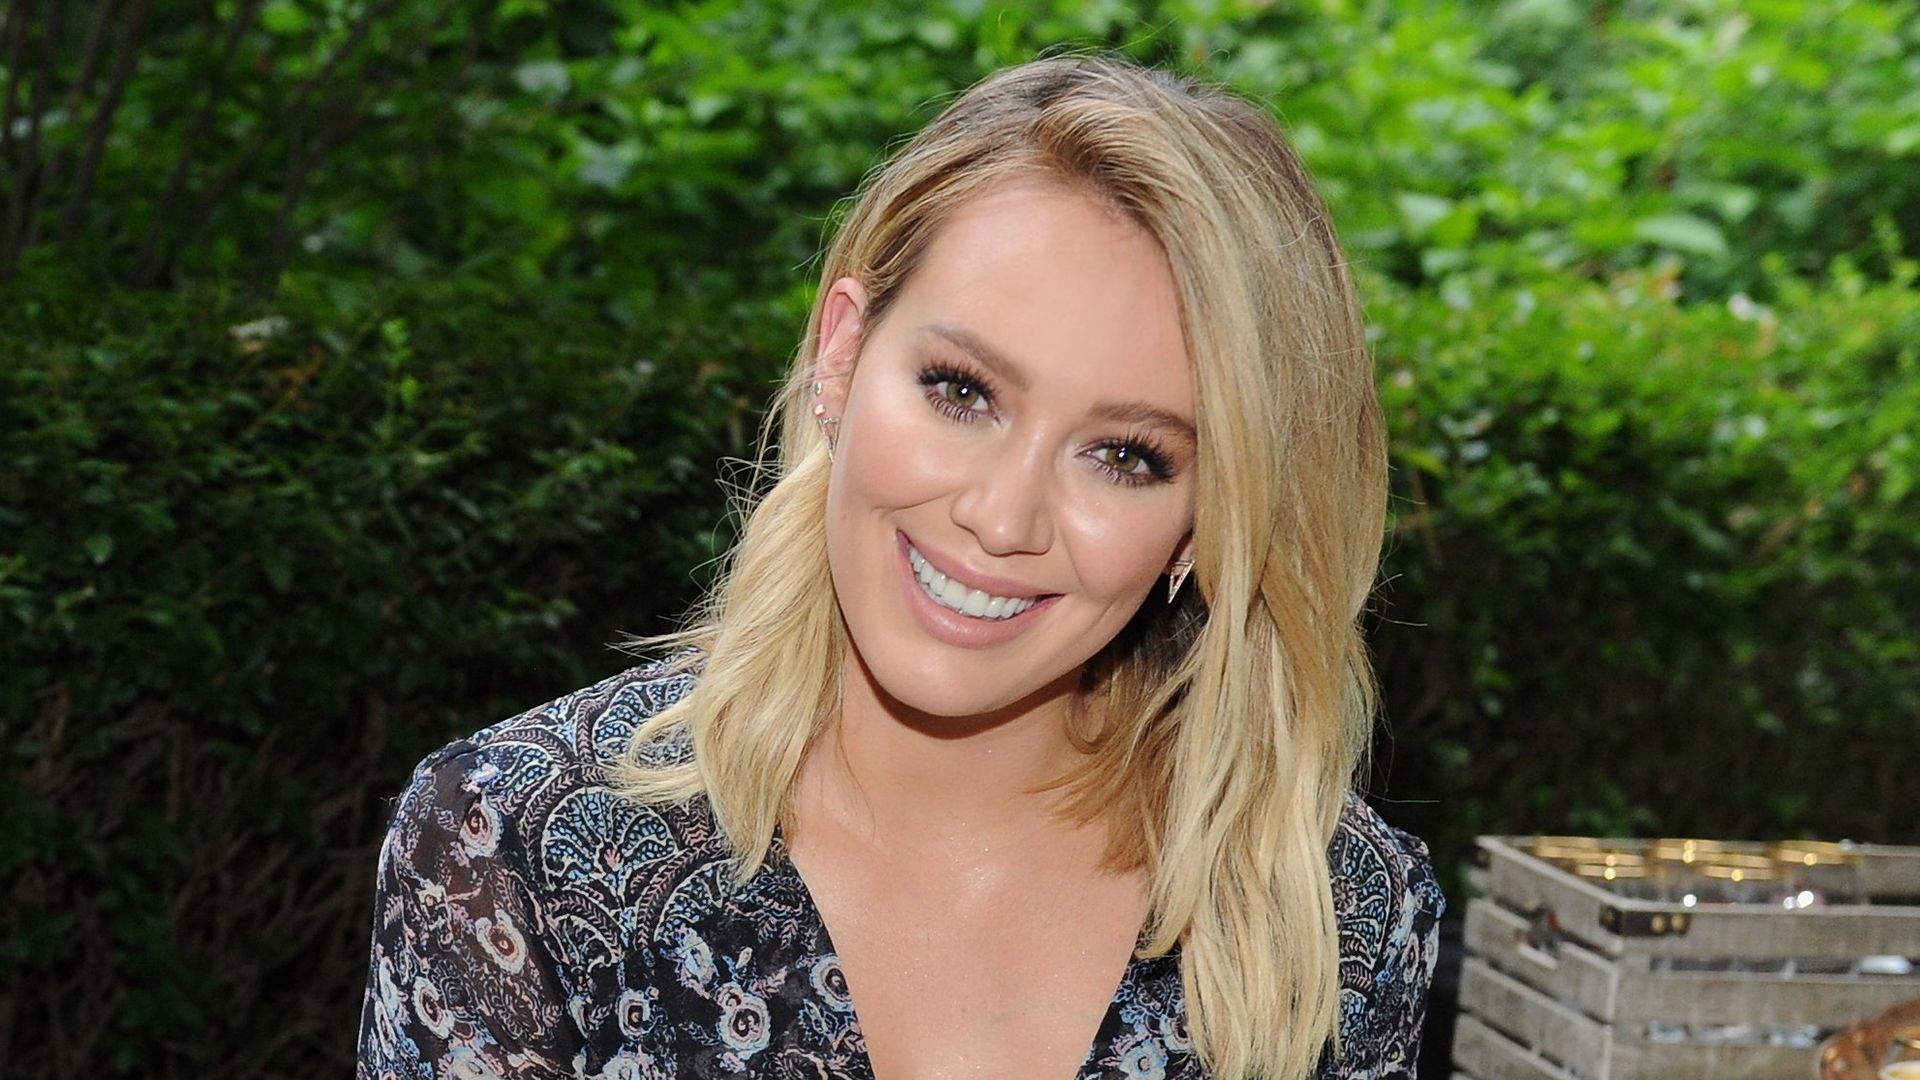 Hilary Duff opens up about being a mom: 'You're always worrying'